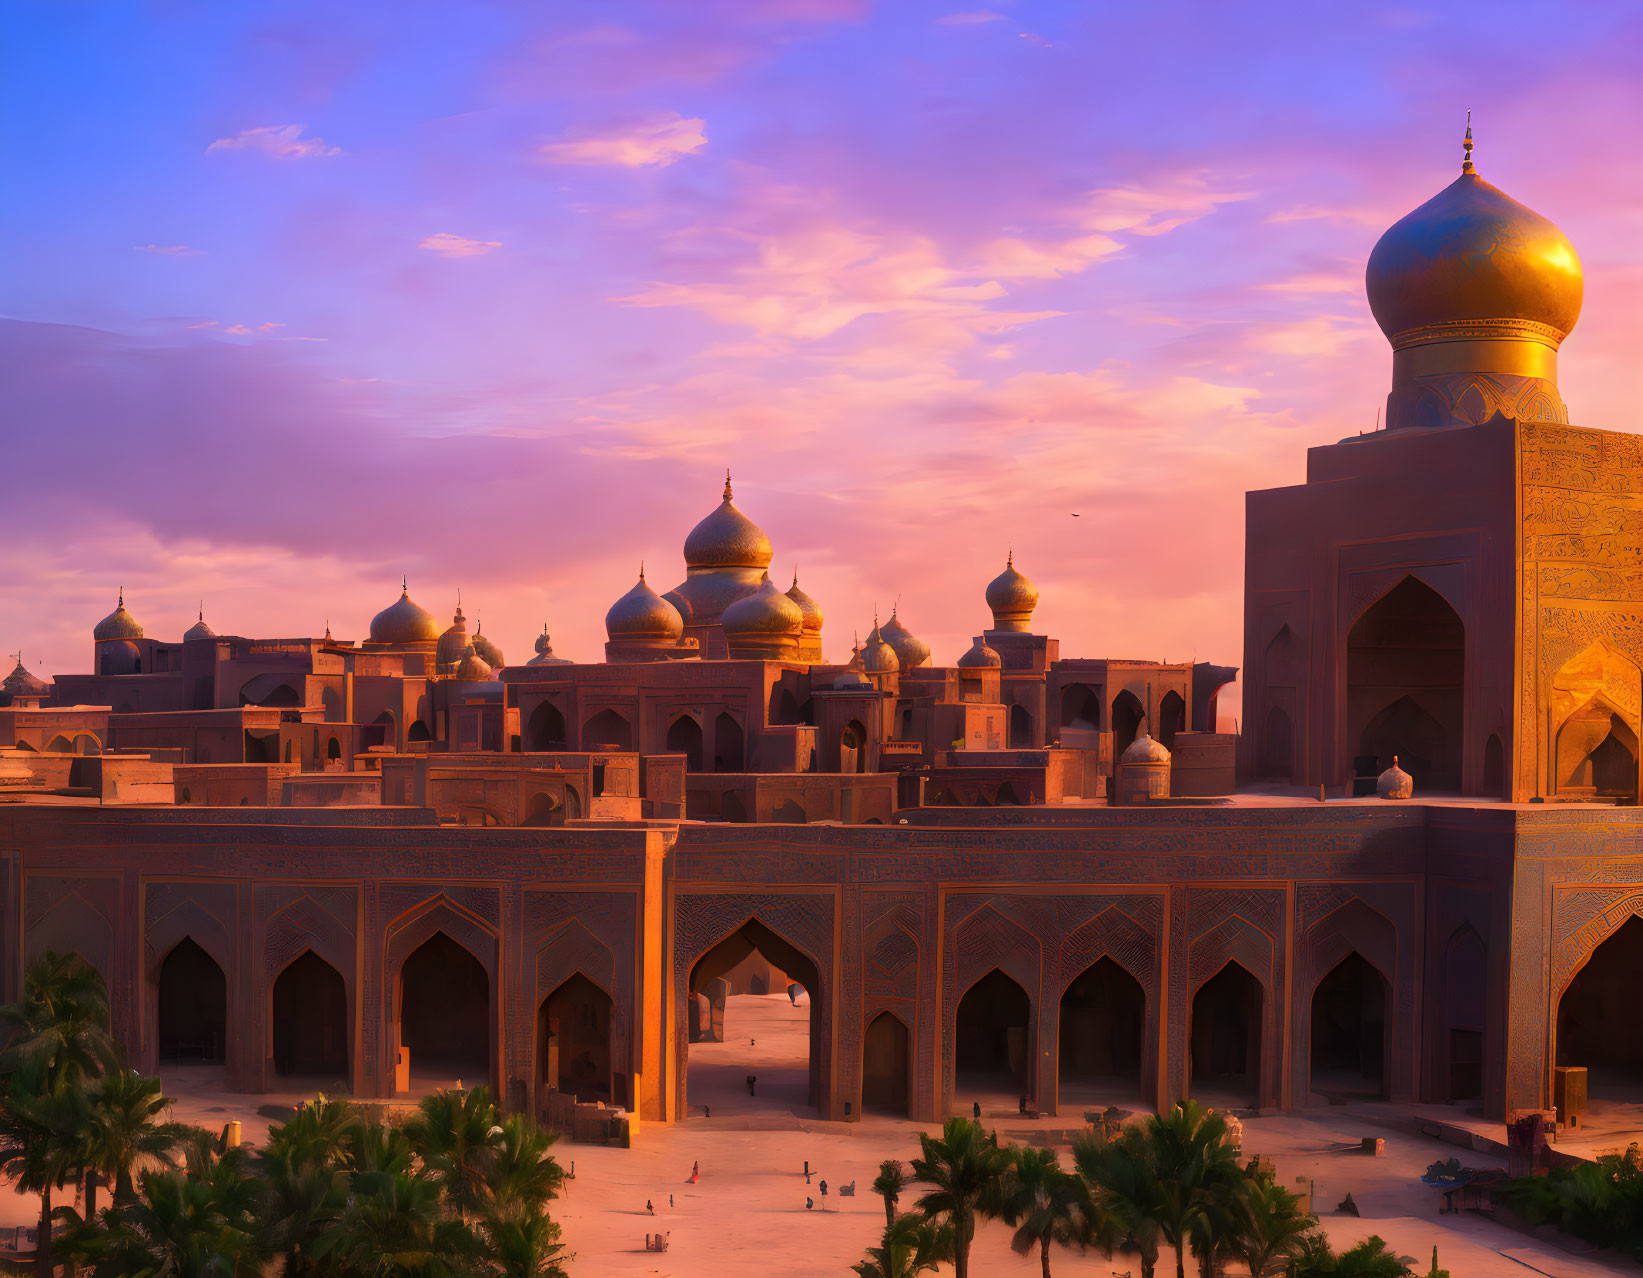 Ancient Middle Eastern city with golden domes and arches at sunset